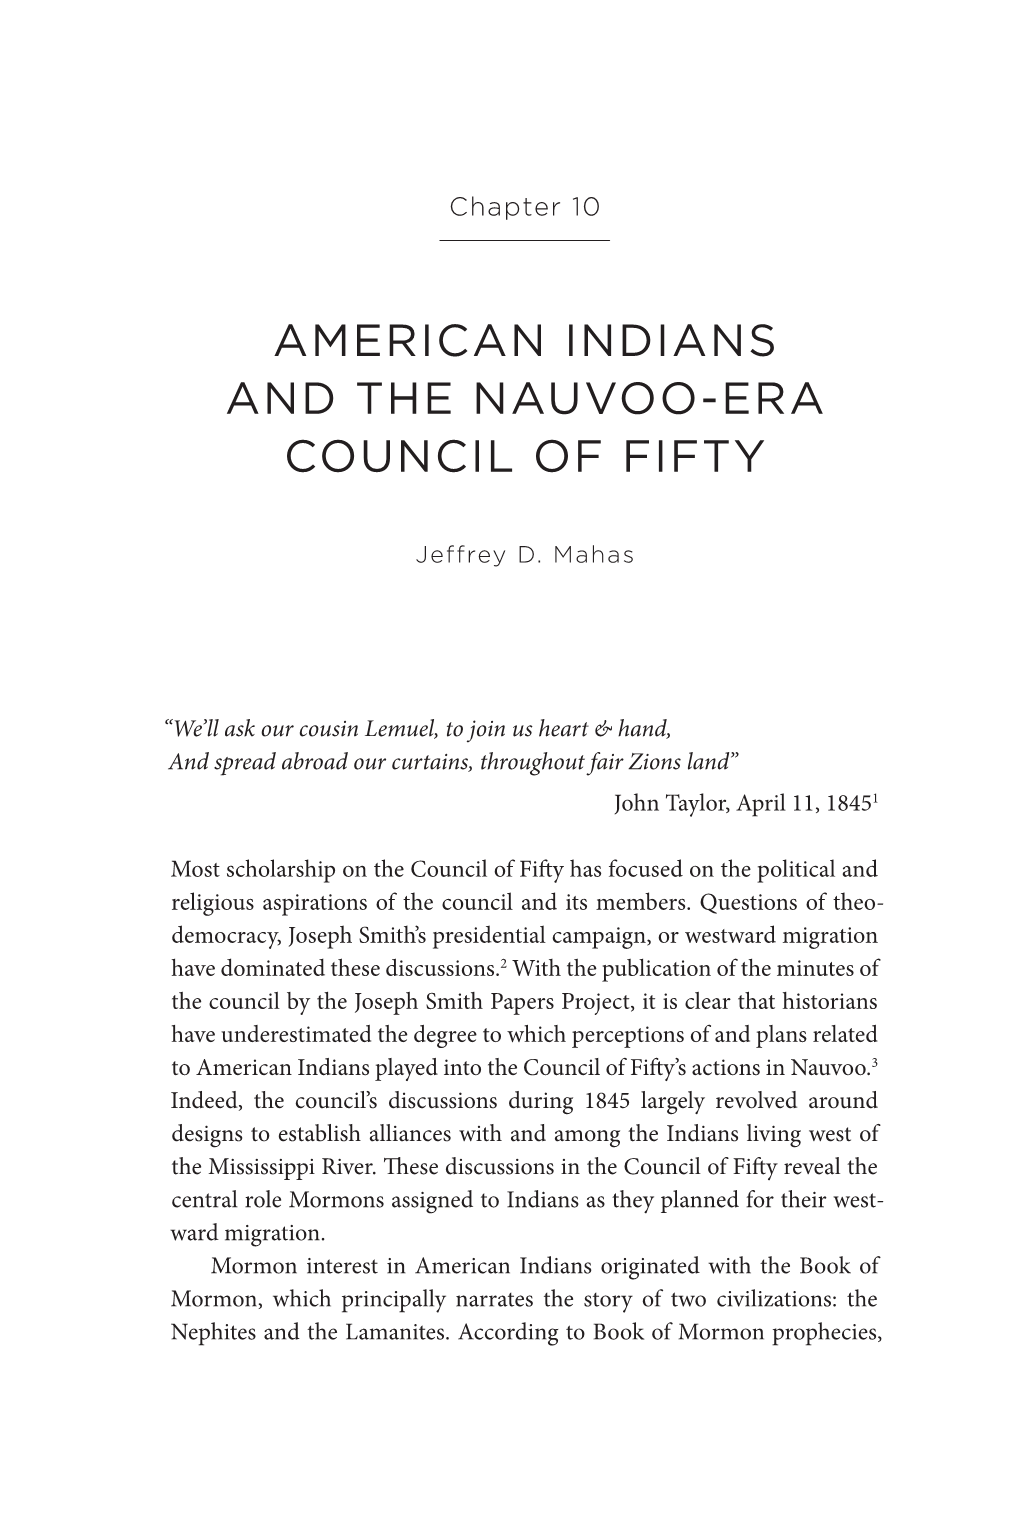 American Indians and the Nauvoo-Era Council of Fifty